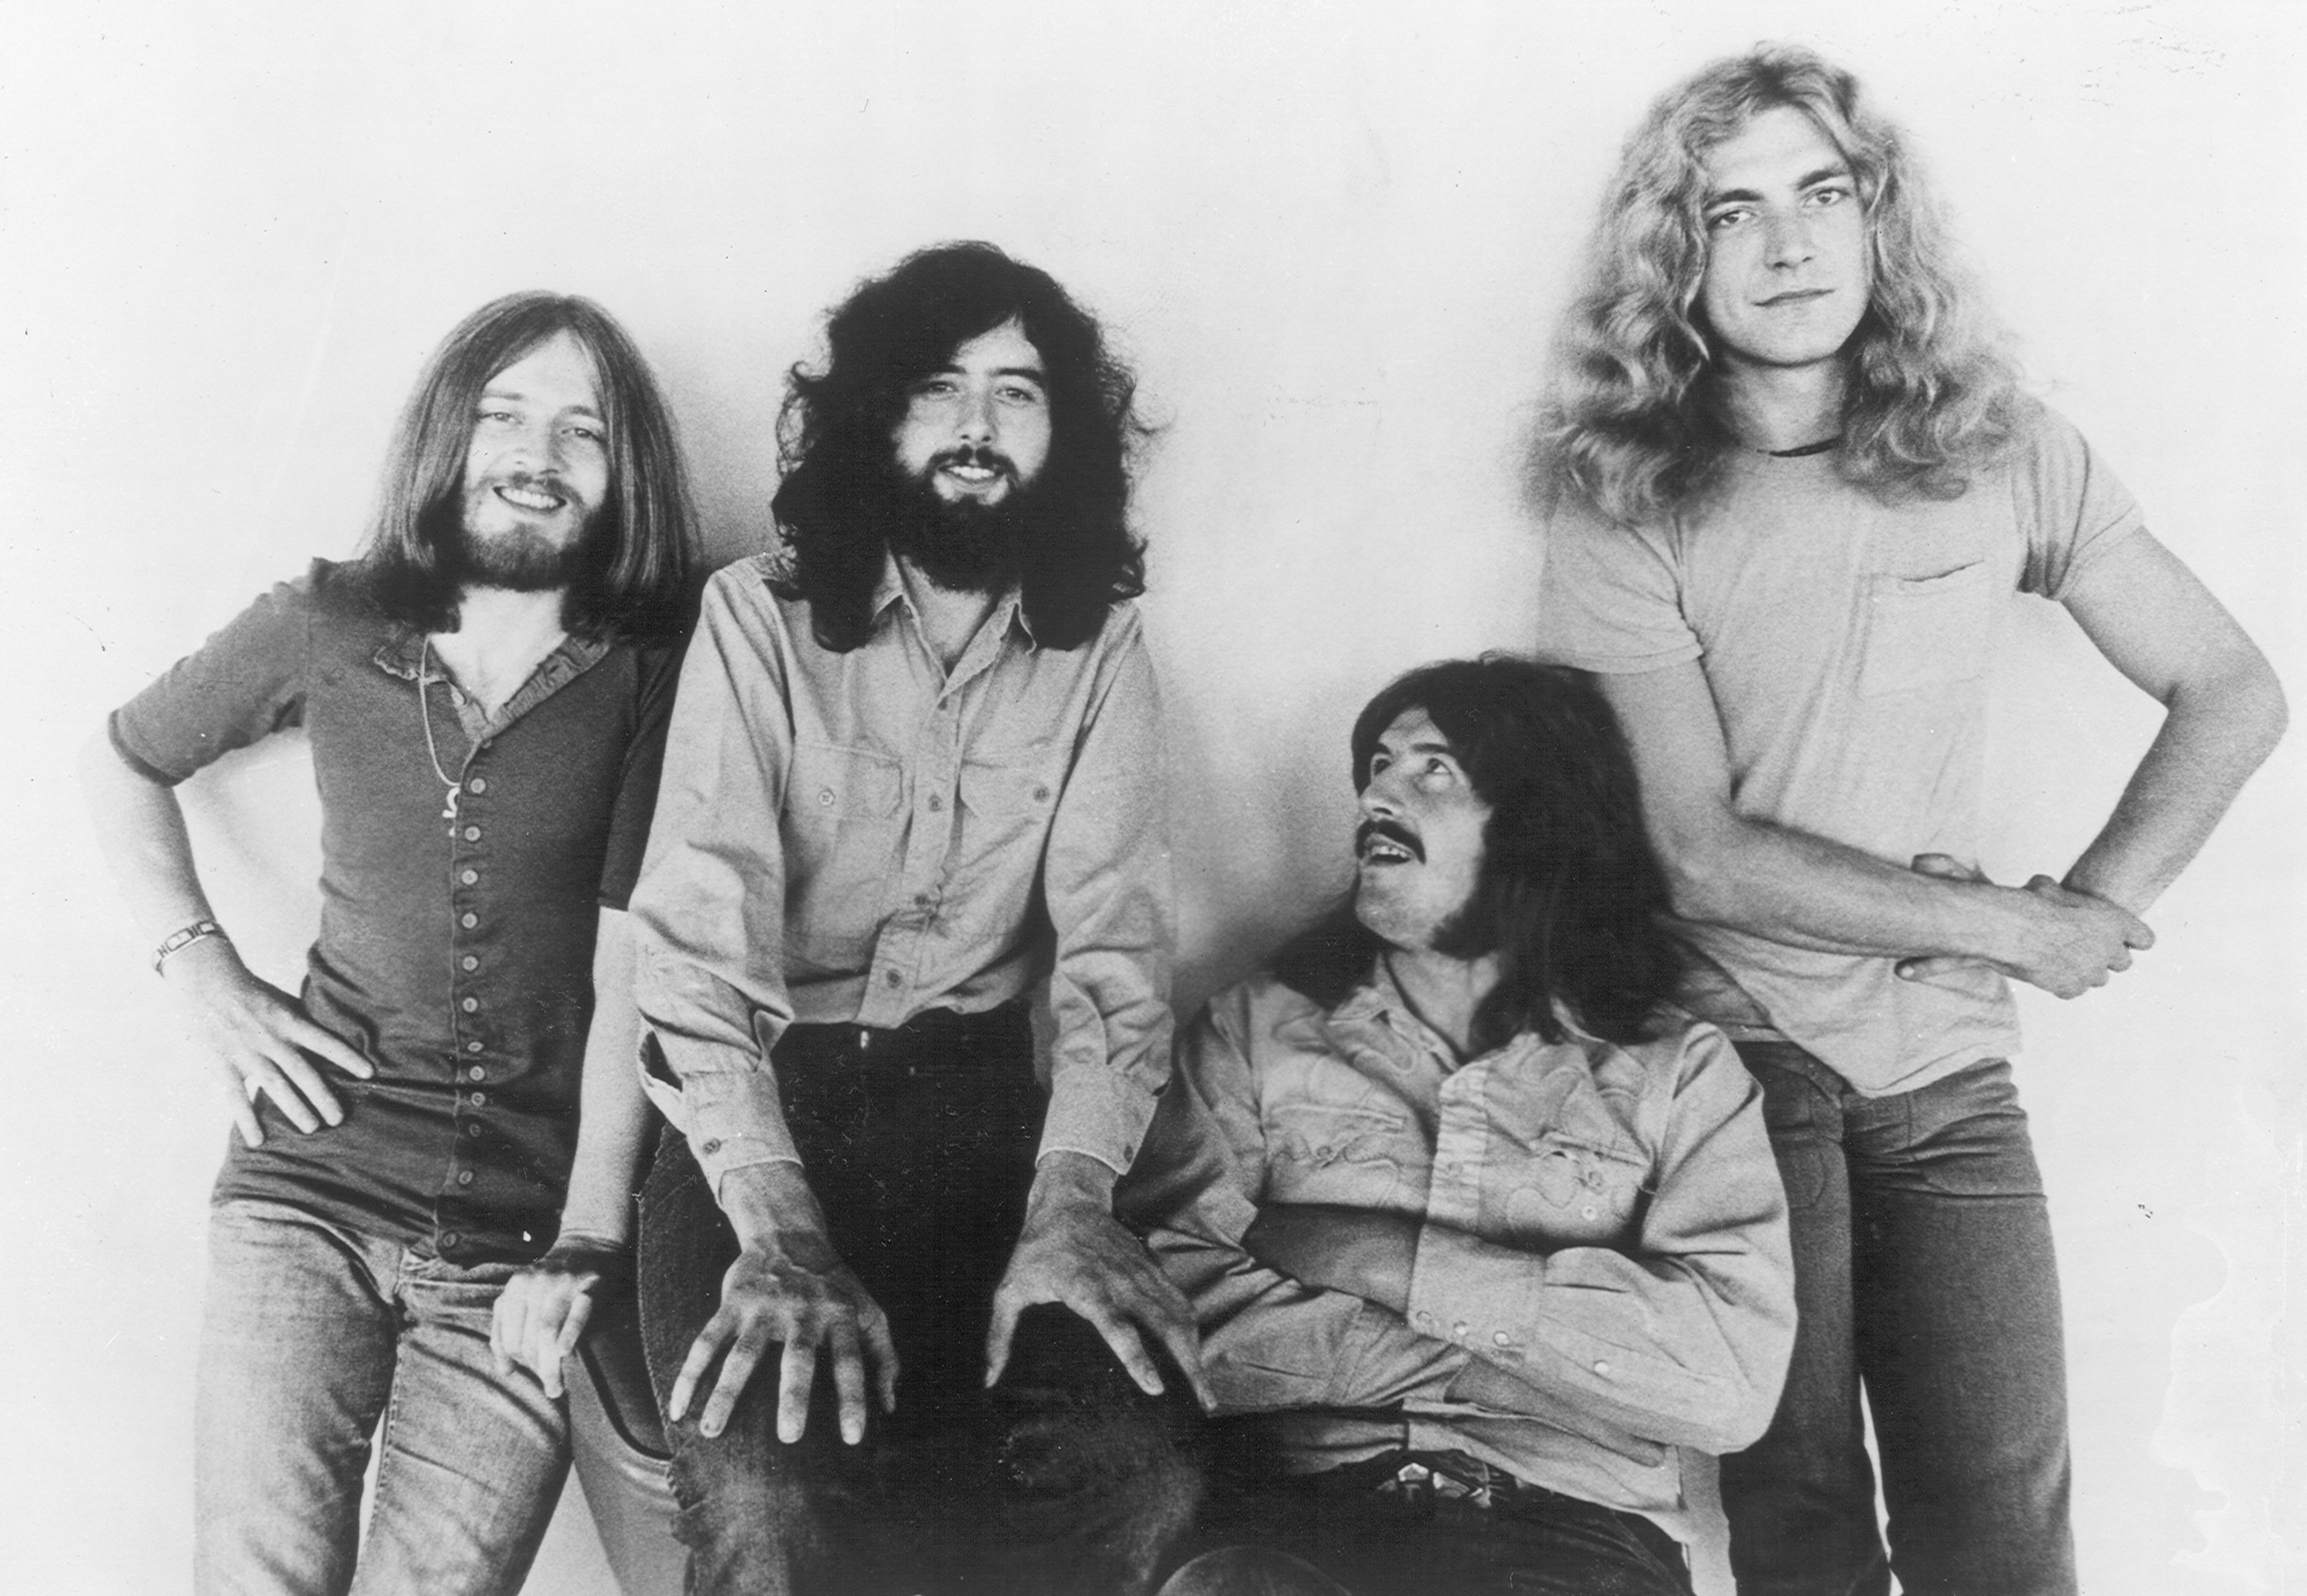 Led Zeppelin leaning against a wall